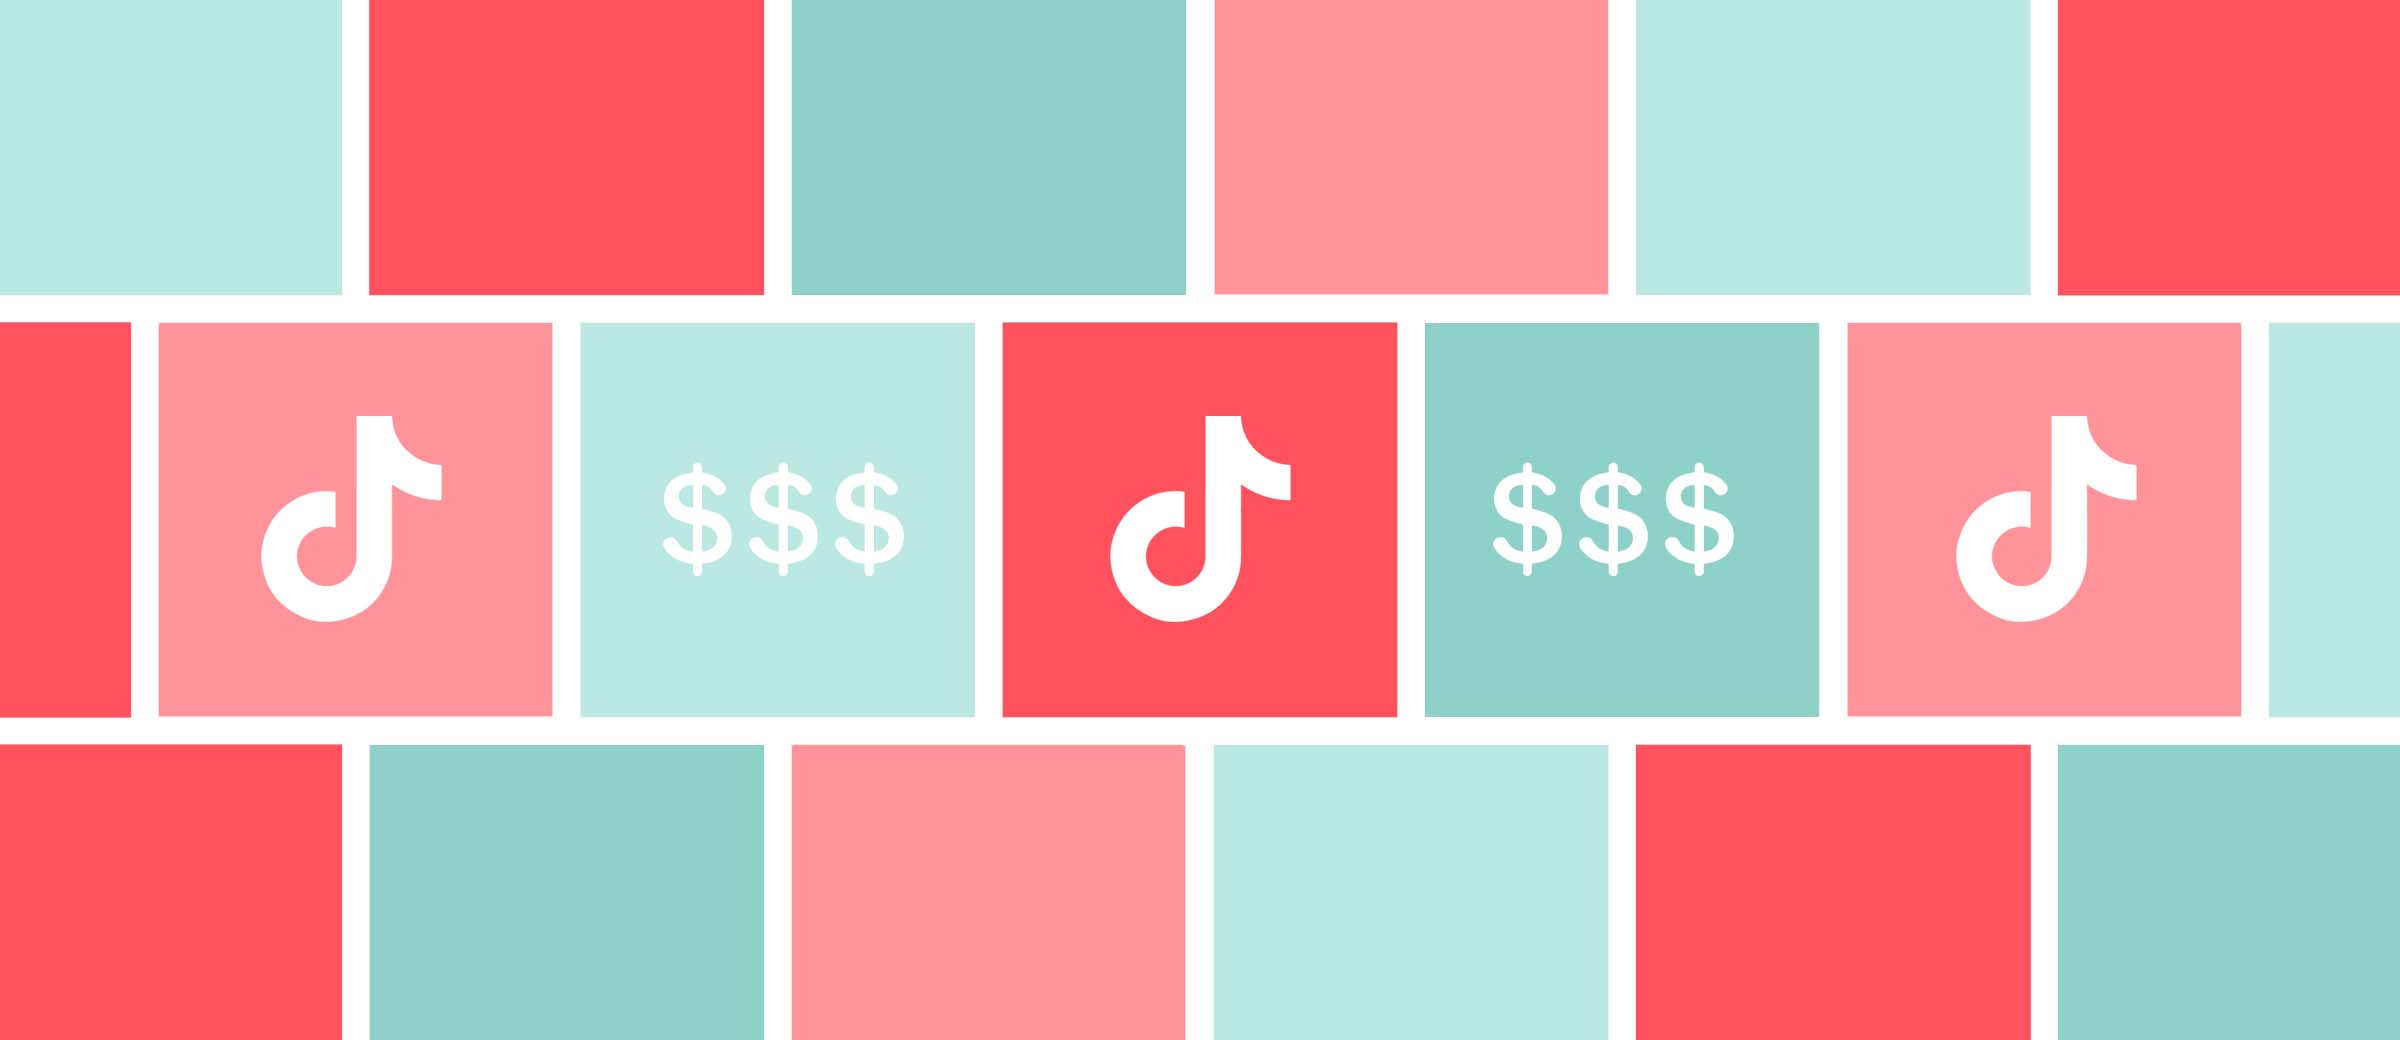 Read about How to Make Money on TikTok: 3 Monetization Tips, on PLANOLY